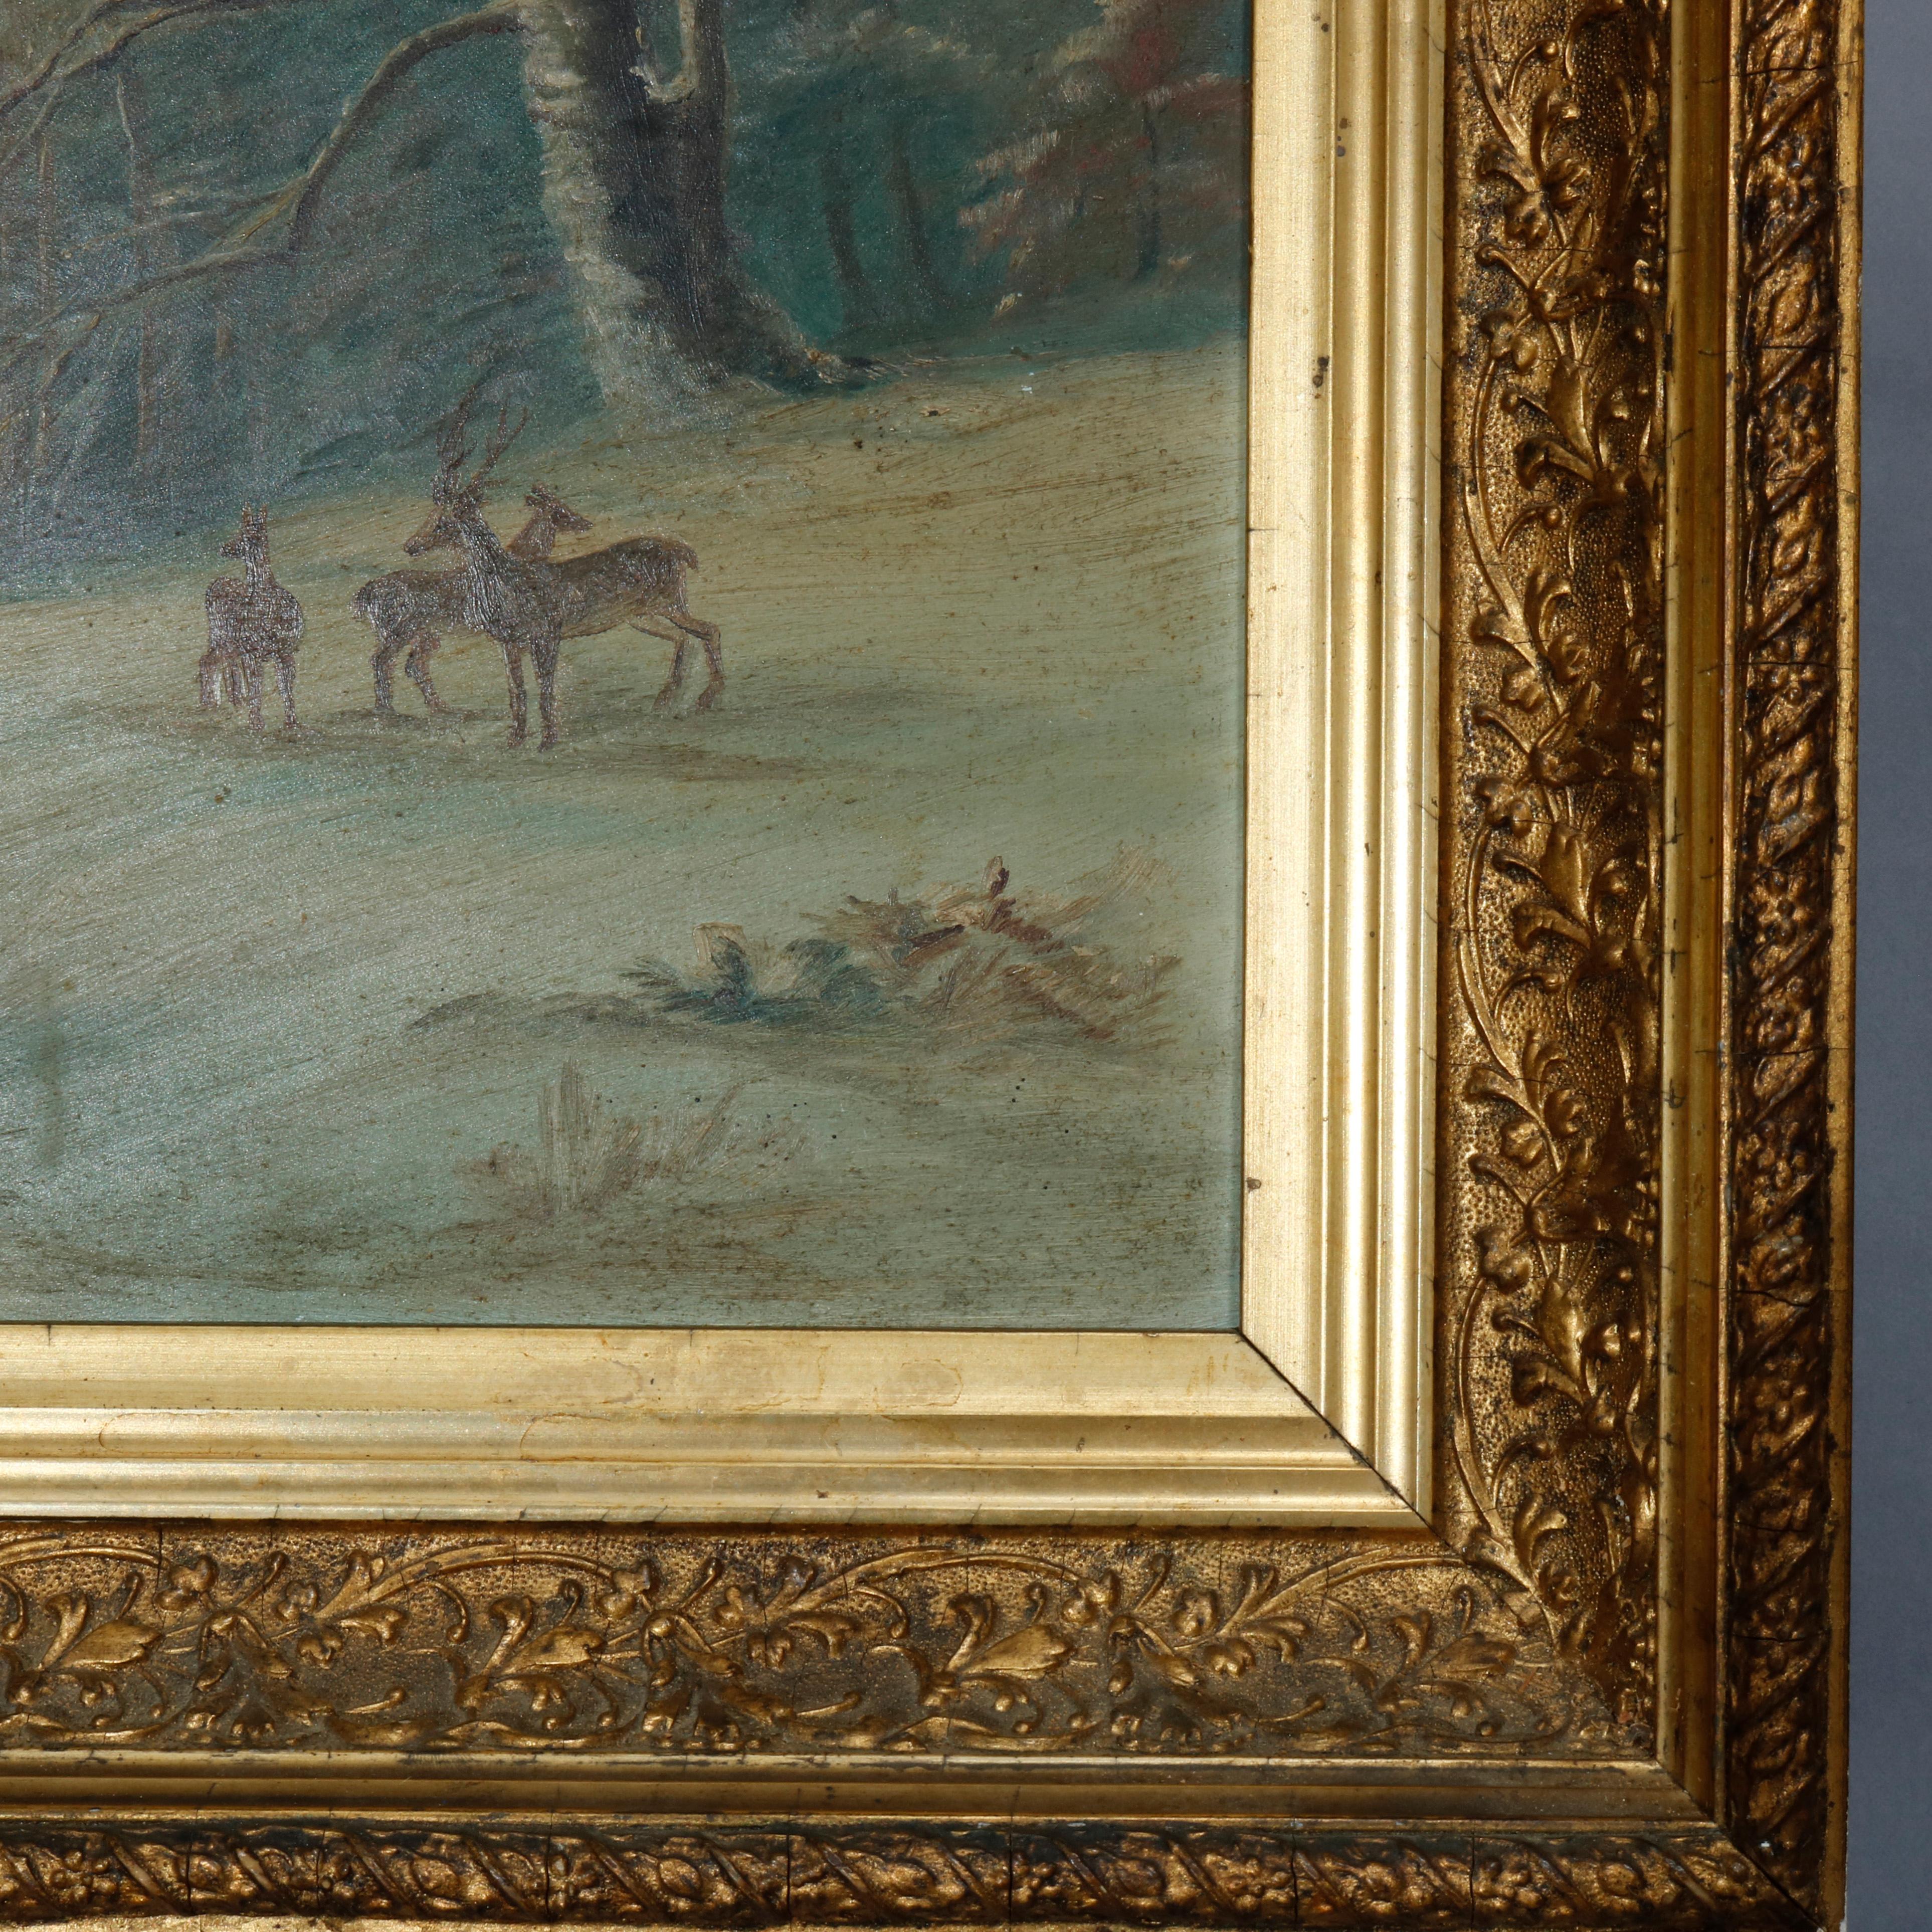 Giltwood Antique Hudson River School Oil on Board Painting, Winter Scene with Deer, c1890